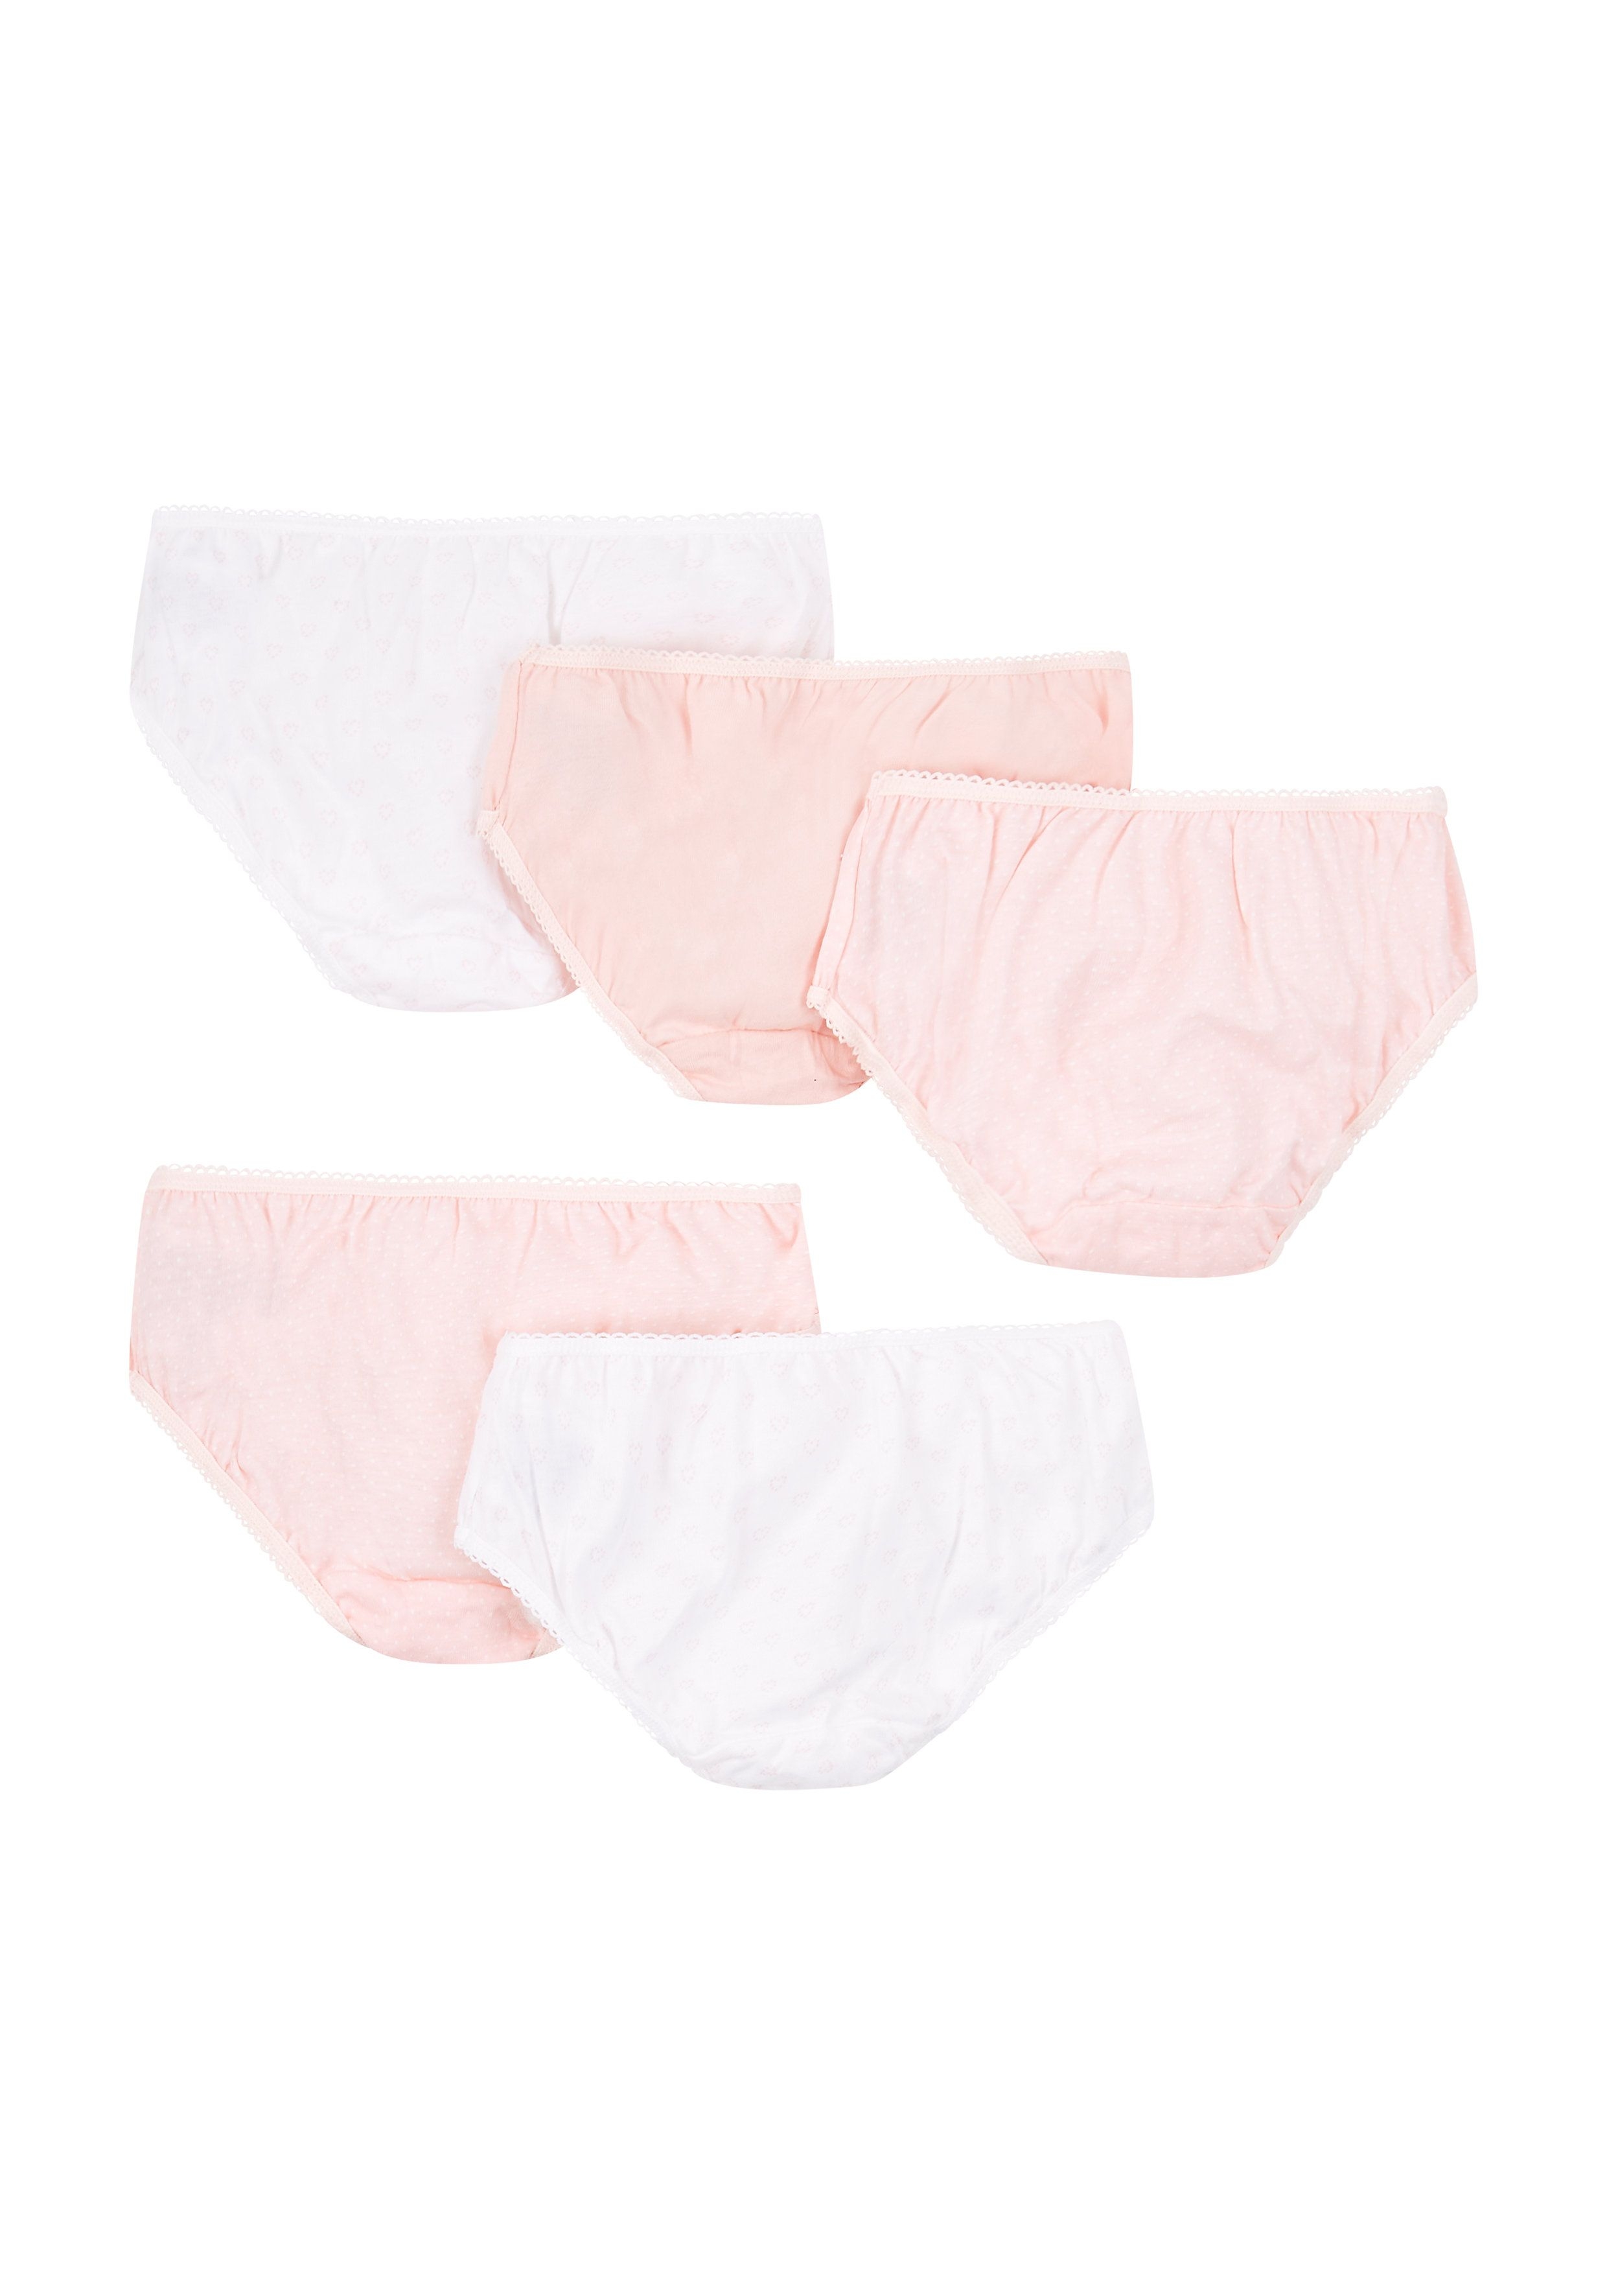 Mothercare | Girls Pink And White Briefs - 5 Pack - Multicolor 1